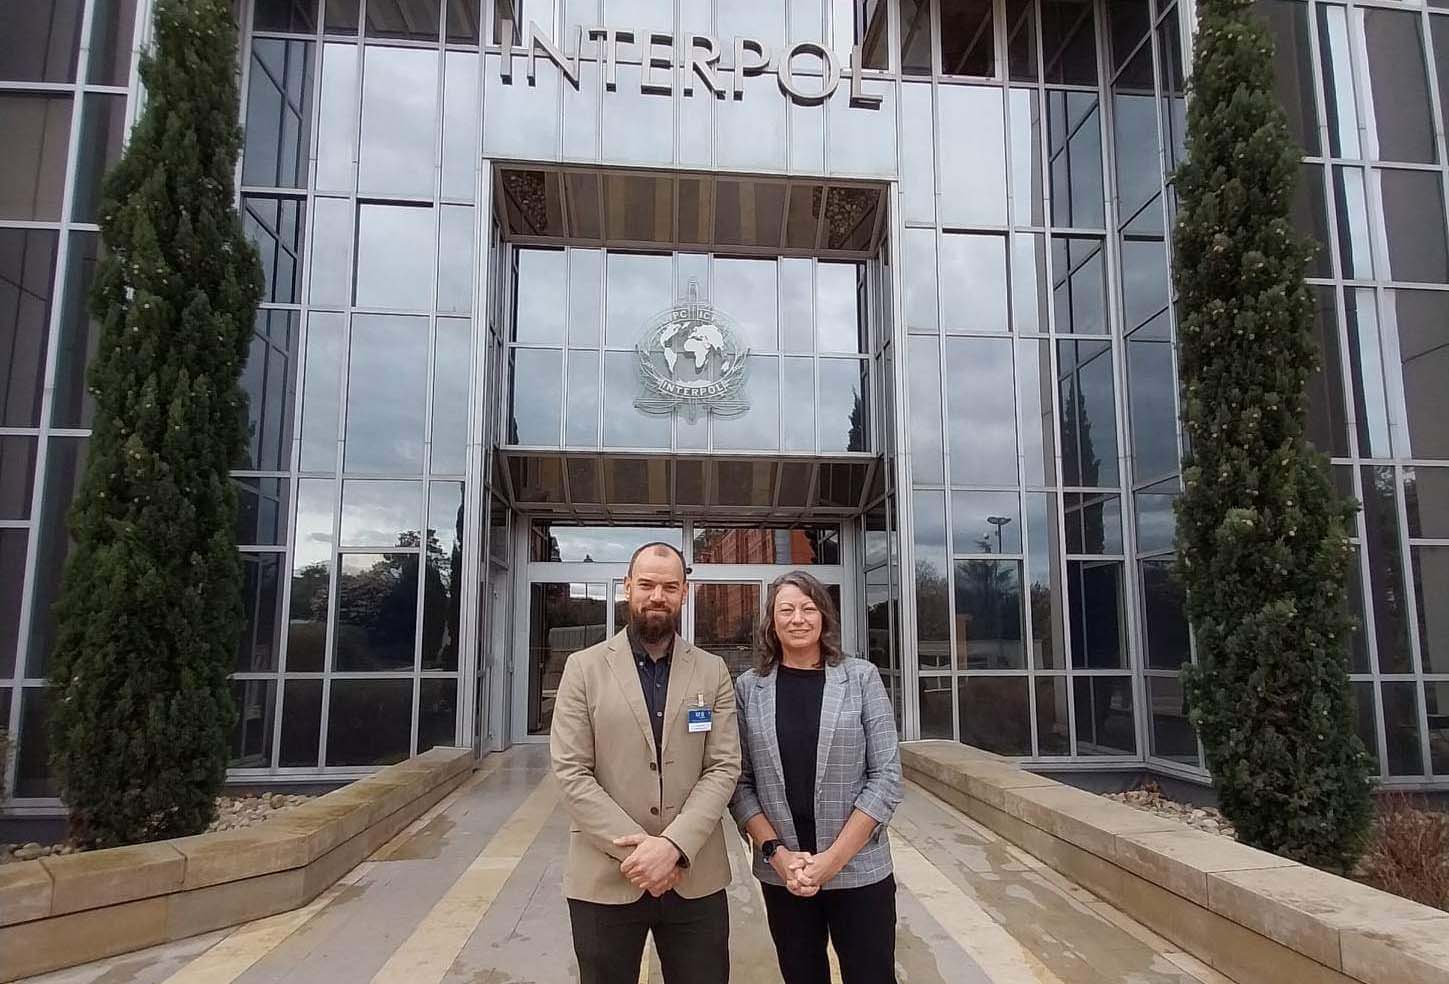 ACCCE members at Interpol building